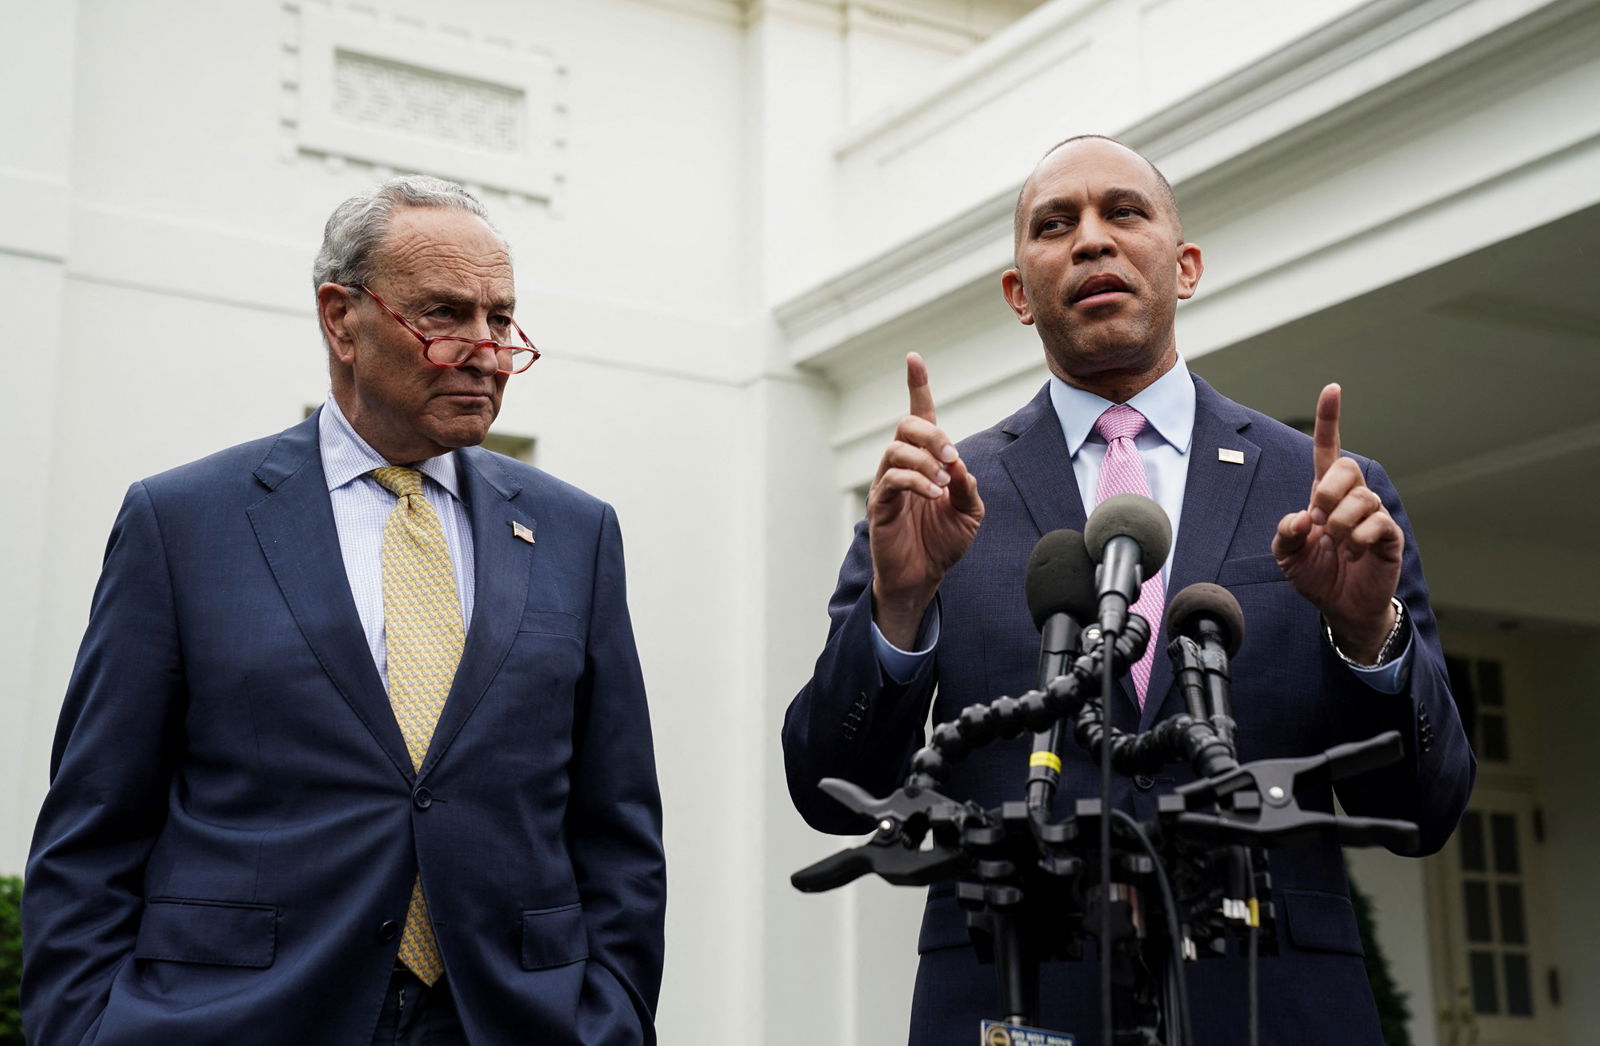 Chuck Schumer watches on as Hakeem Jeffries speaks at a stand of microphones outside the White House.